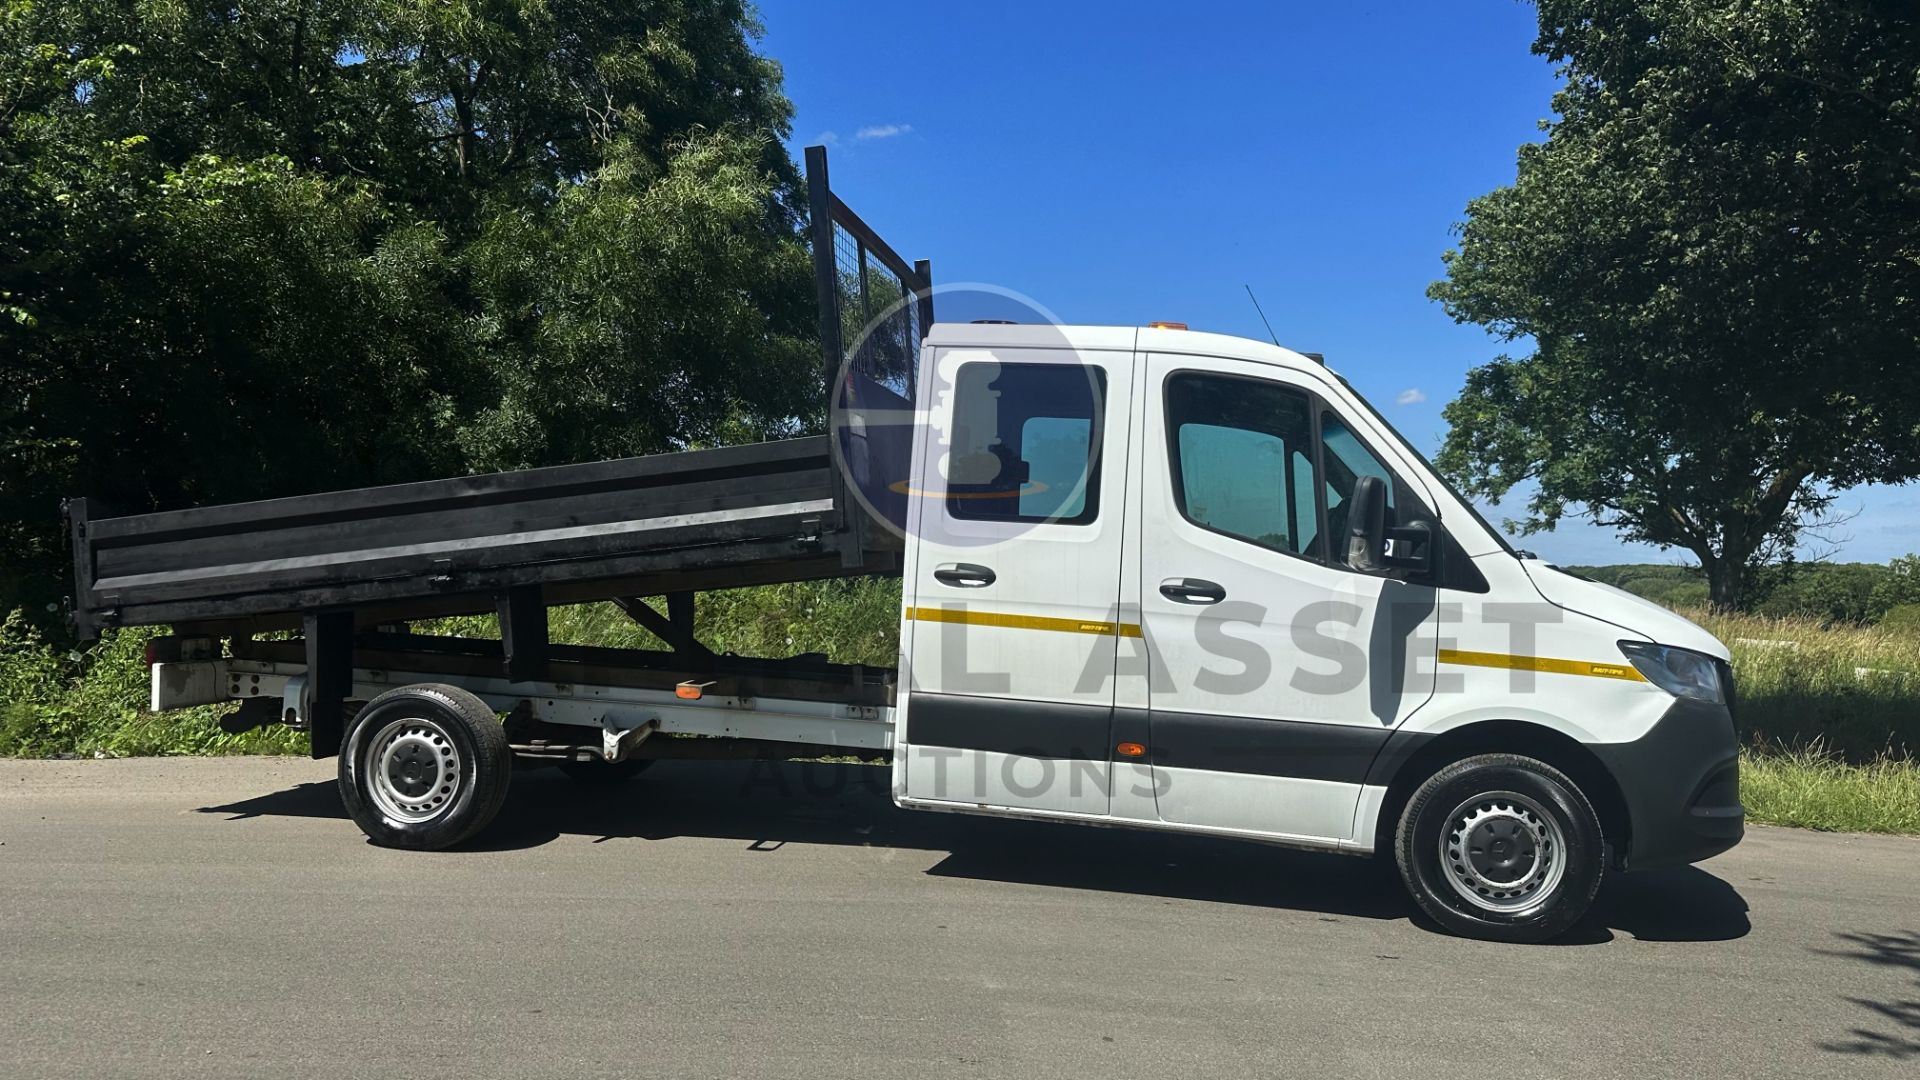 (ON SALE) MERCEDES-BENZ SPRINTER 314 CDI *LWB - UTILITY D/CAB TIPPER* (2019 - NEW MODEL) (57K ONLY) - Image 13 of 37